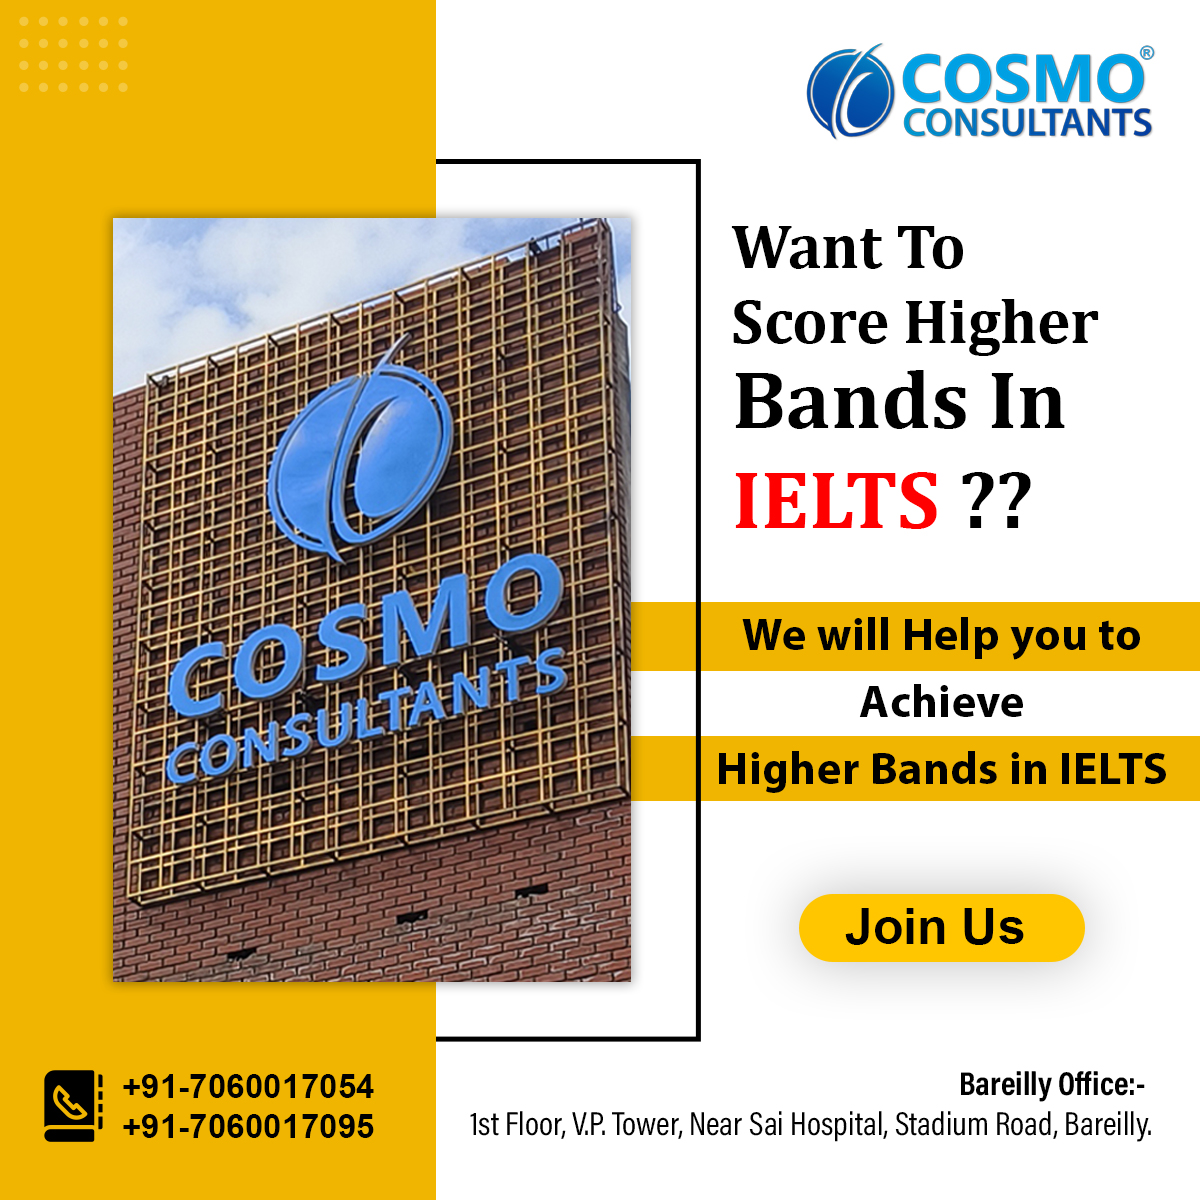 Ready to achieve your target #IELTS score? 🌟 Join #CosmoConsultants and elevate your chances of scoring higher bands in IELTS! 📚💪 Let's turn your IELTS aspirations into accomplishments together. More information: +91-7060017054, +91-7060017095. #IELTSsuccess #ieltsInstitute